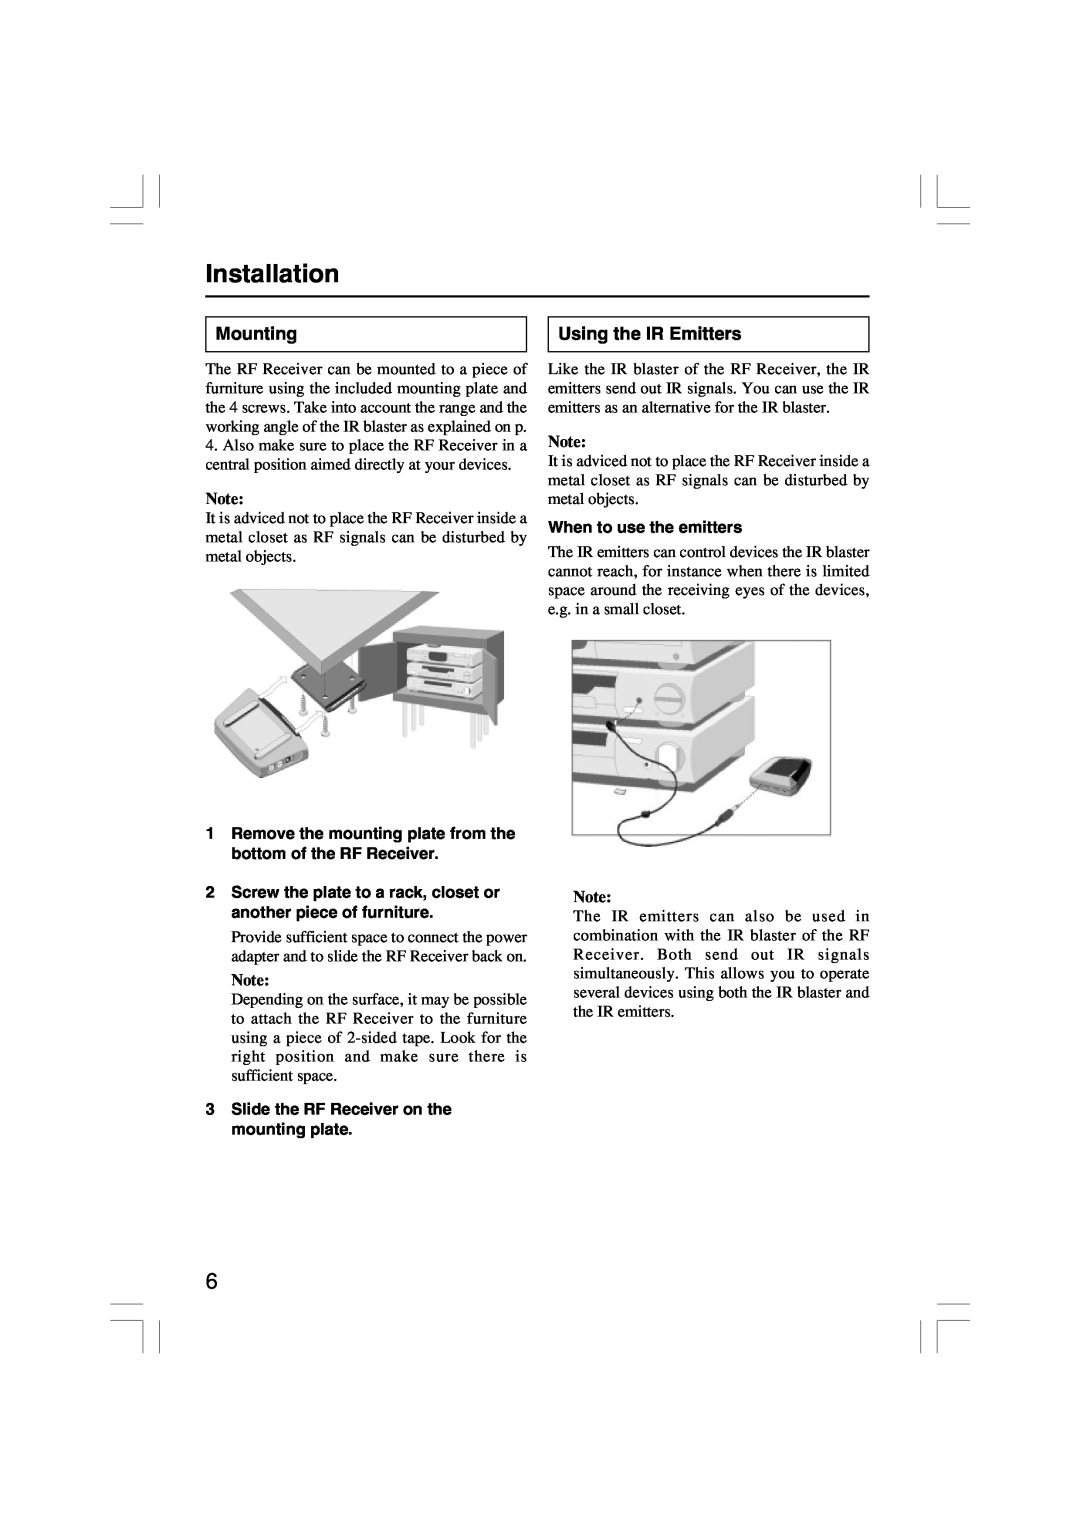 Onkyo RFR-5 instruction manual Installation, Mounting, Using the IR Emitters, When to use the emitters 